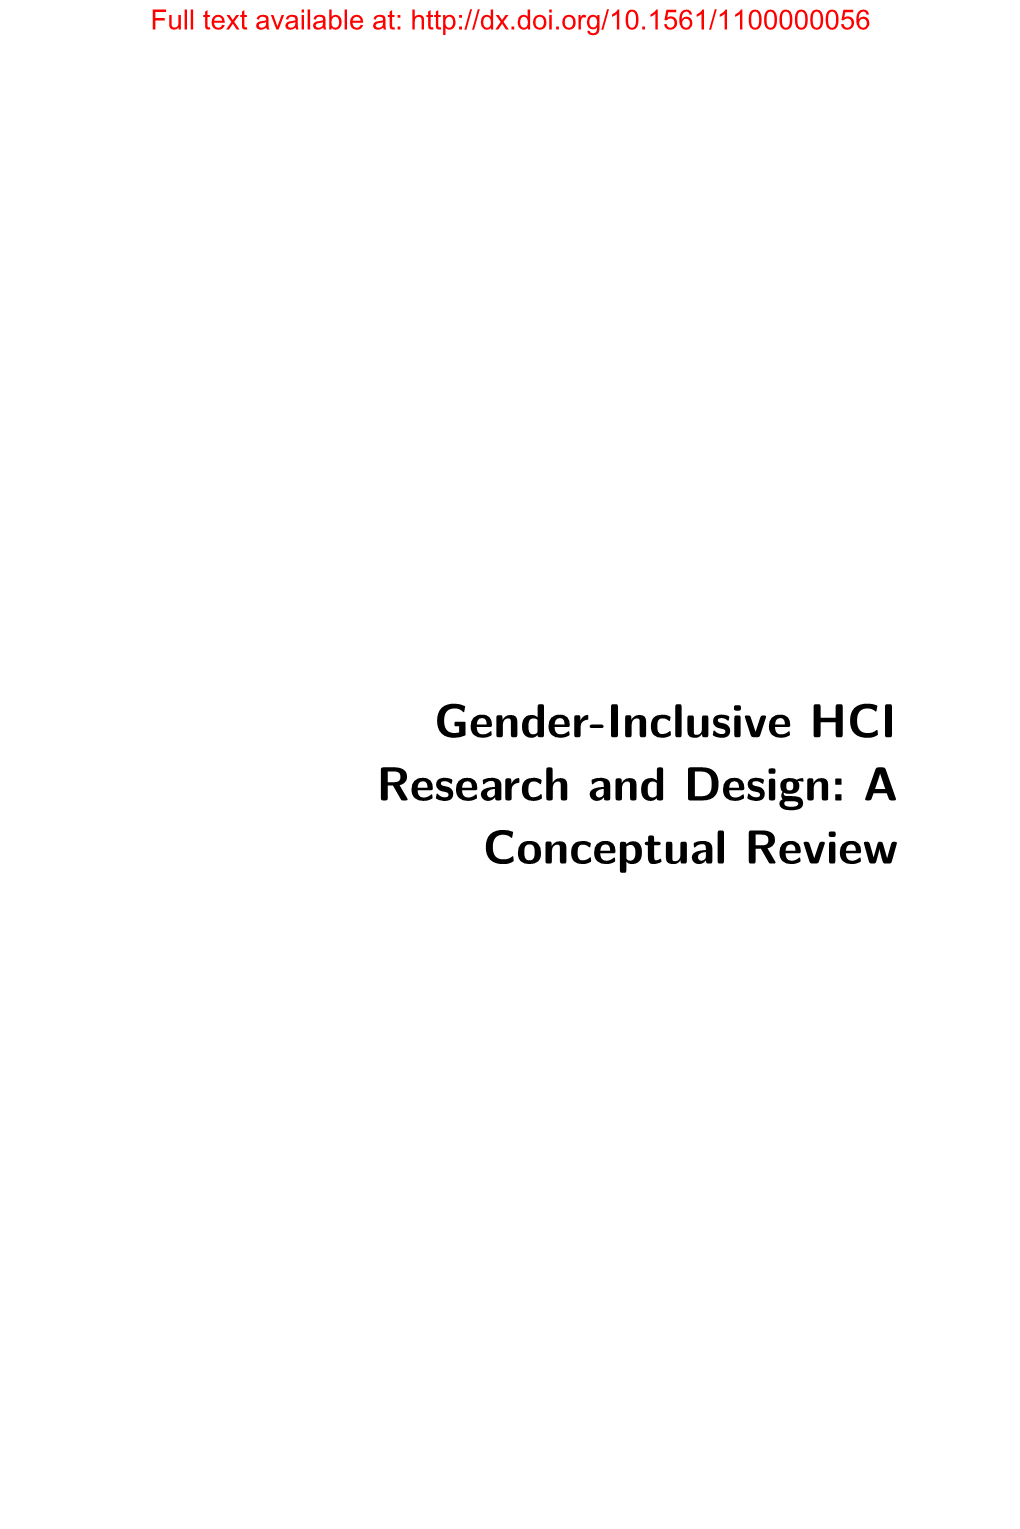 Gender-Inclusive HCI Research and Design: a Conceptual Review Full Text Available At